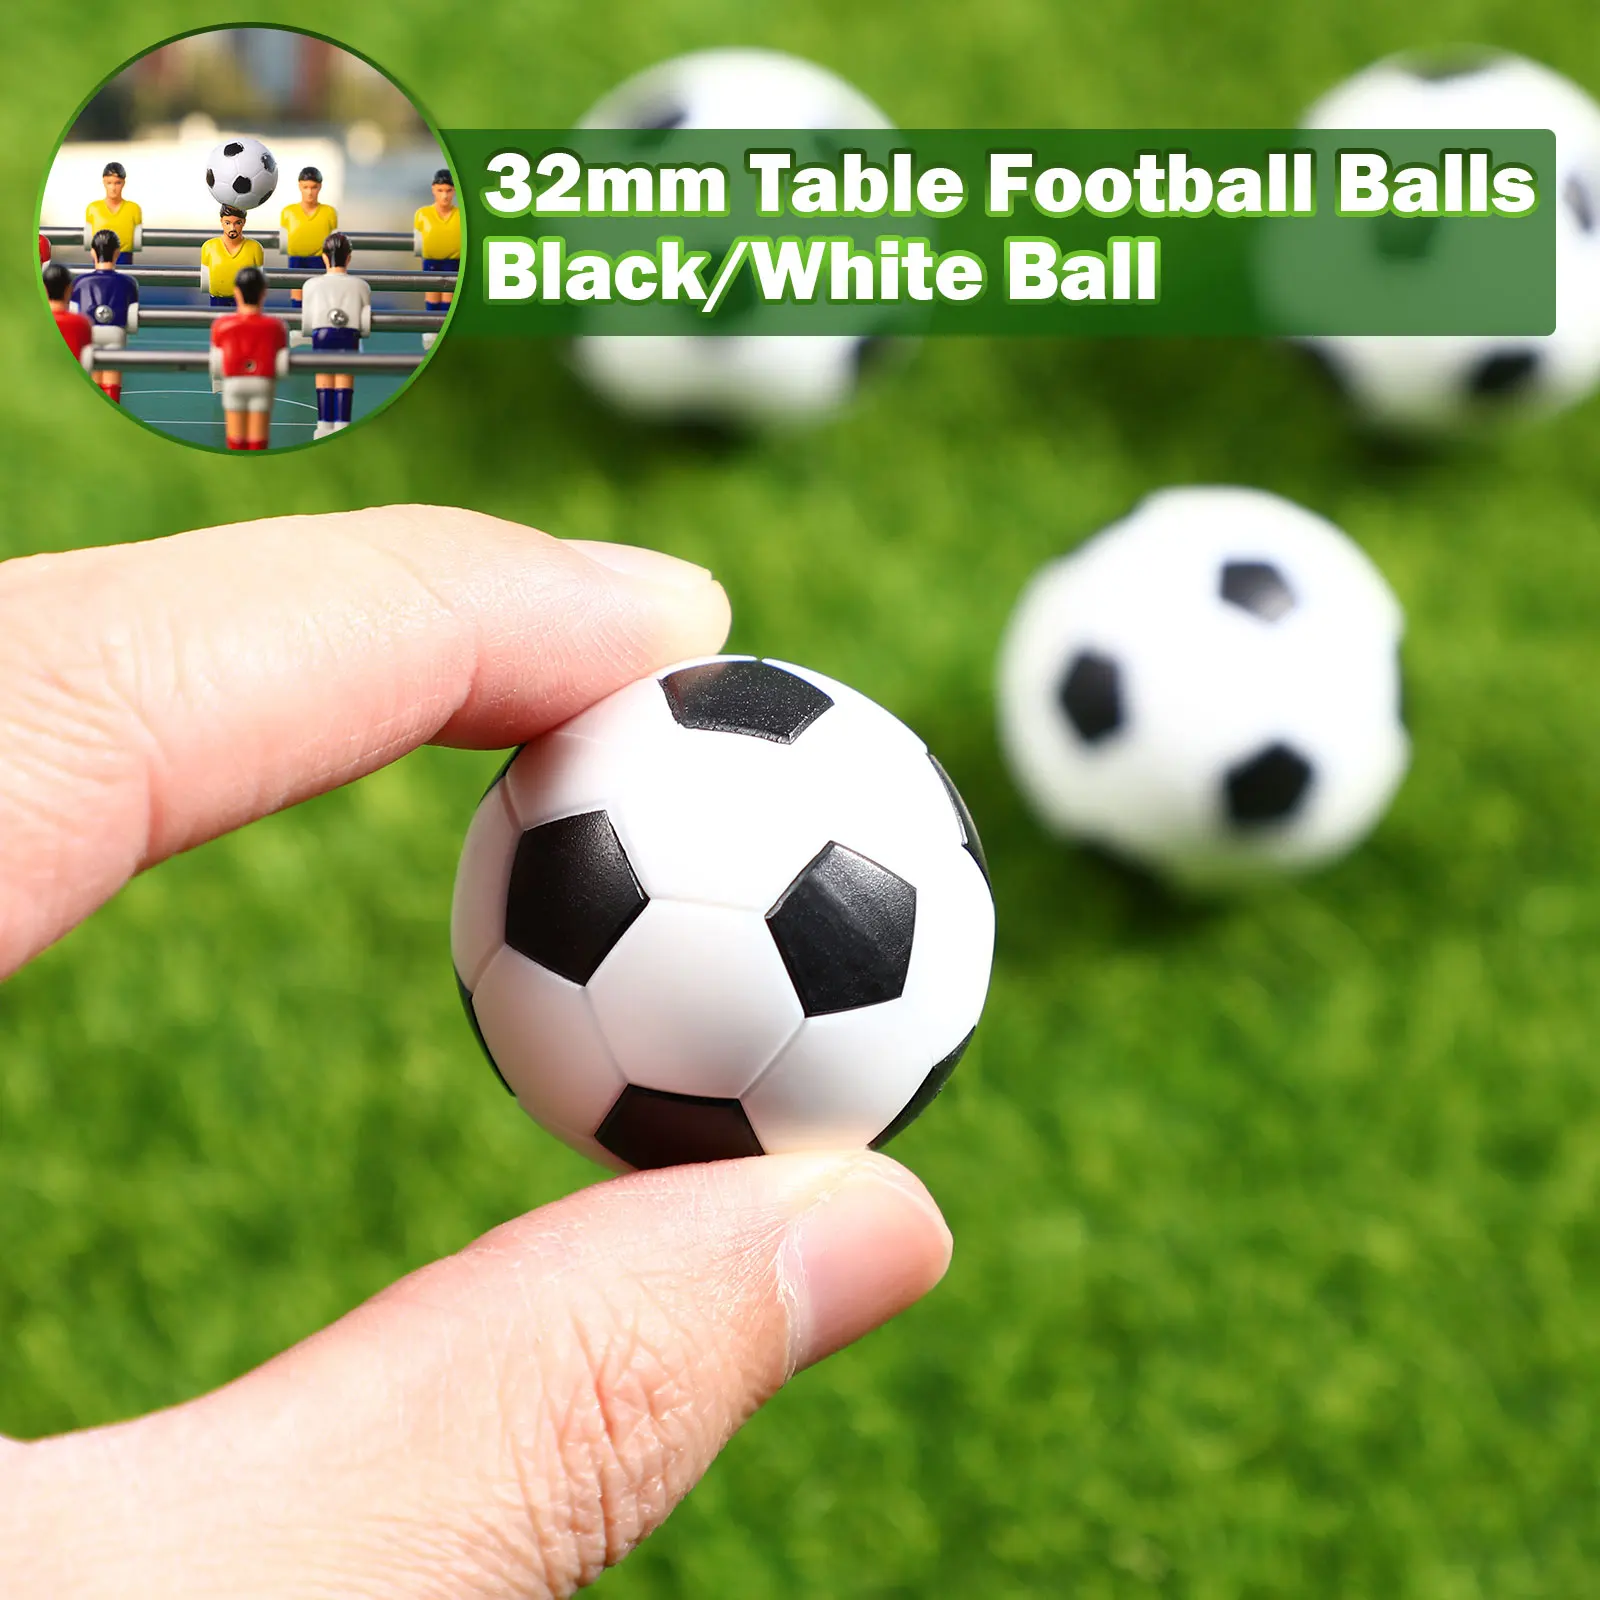 6pcs 32mm Table Soccer Footballs Replacements Mini Black and White Soccer Balls black and white football Table Soccer playiing